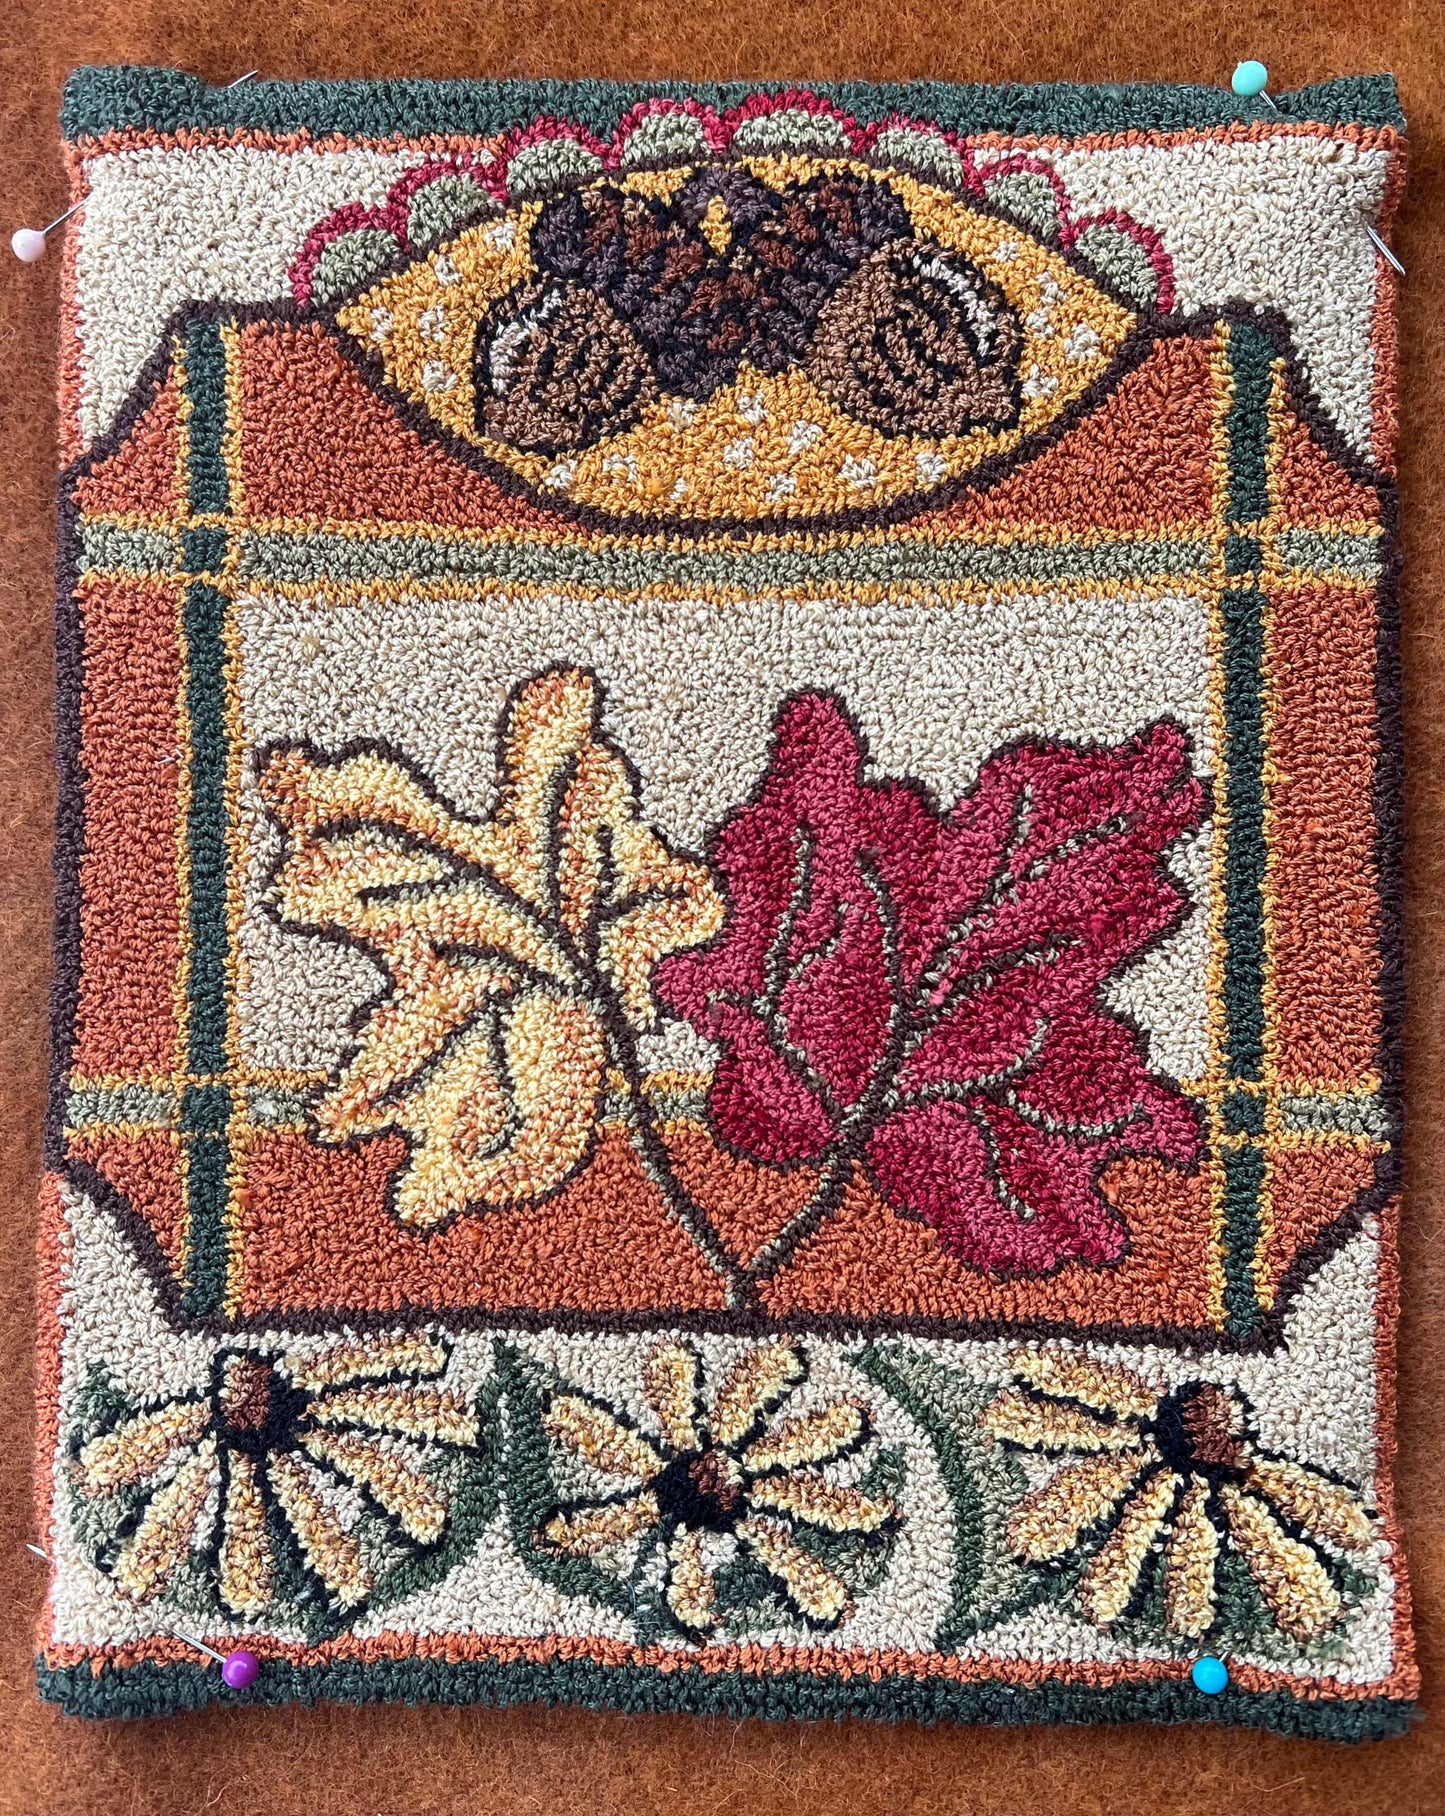 Autumn Leaves Punch Needle Pattern by Orphaned Wool. This is the third pattern in the series of four seasonal patterns. Choose a Paper or Cloth Pattern, both include a full-color thread placement guide for easy visual reference to the pattern colors. Copyright 2022 Kelly Kanyok / Orphaned Wool